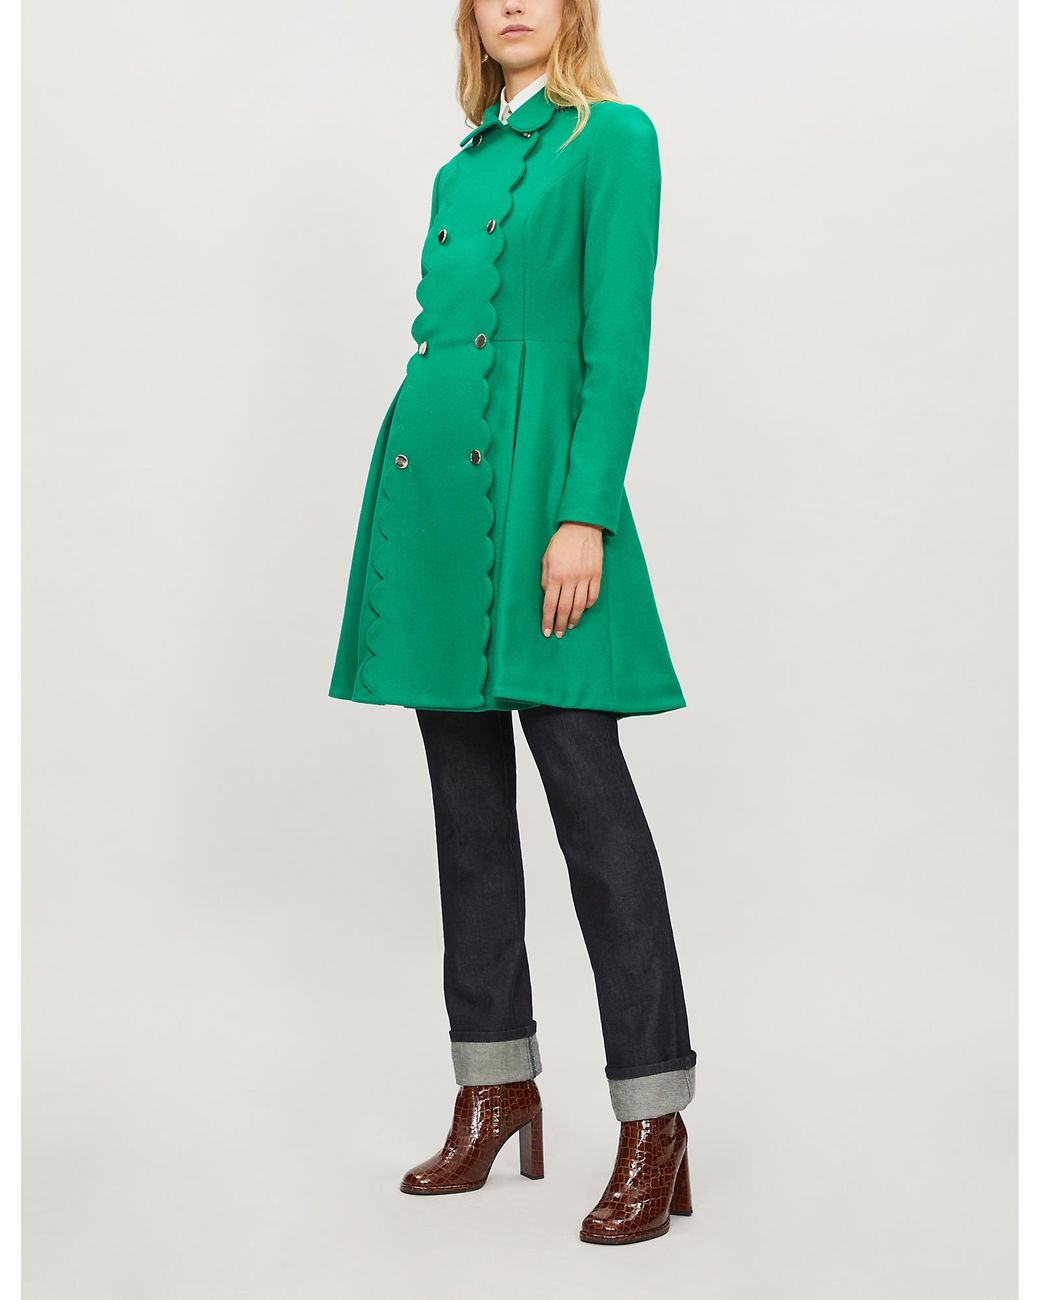 Ted Baker Blarnch Scalloped Wool-blend Coat in Bright Green (Green) | Lyst